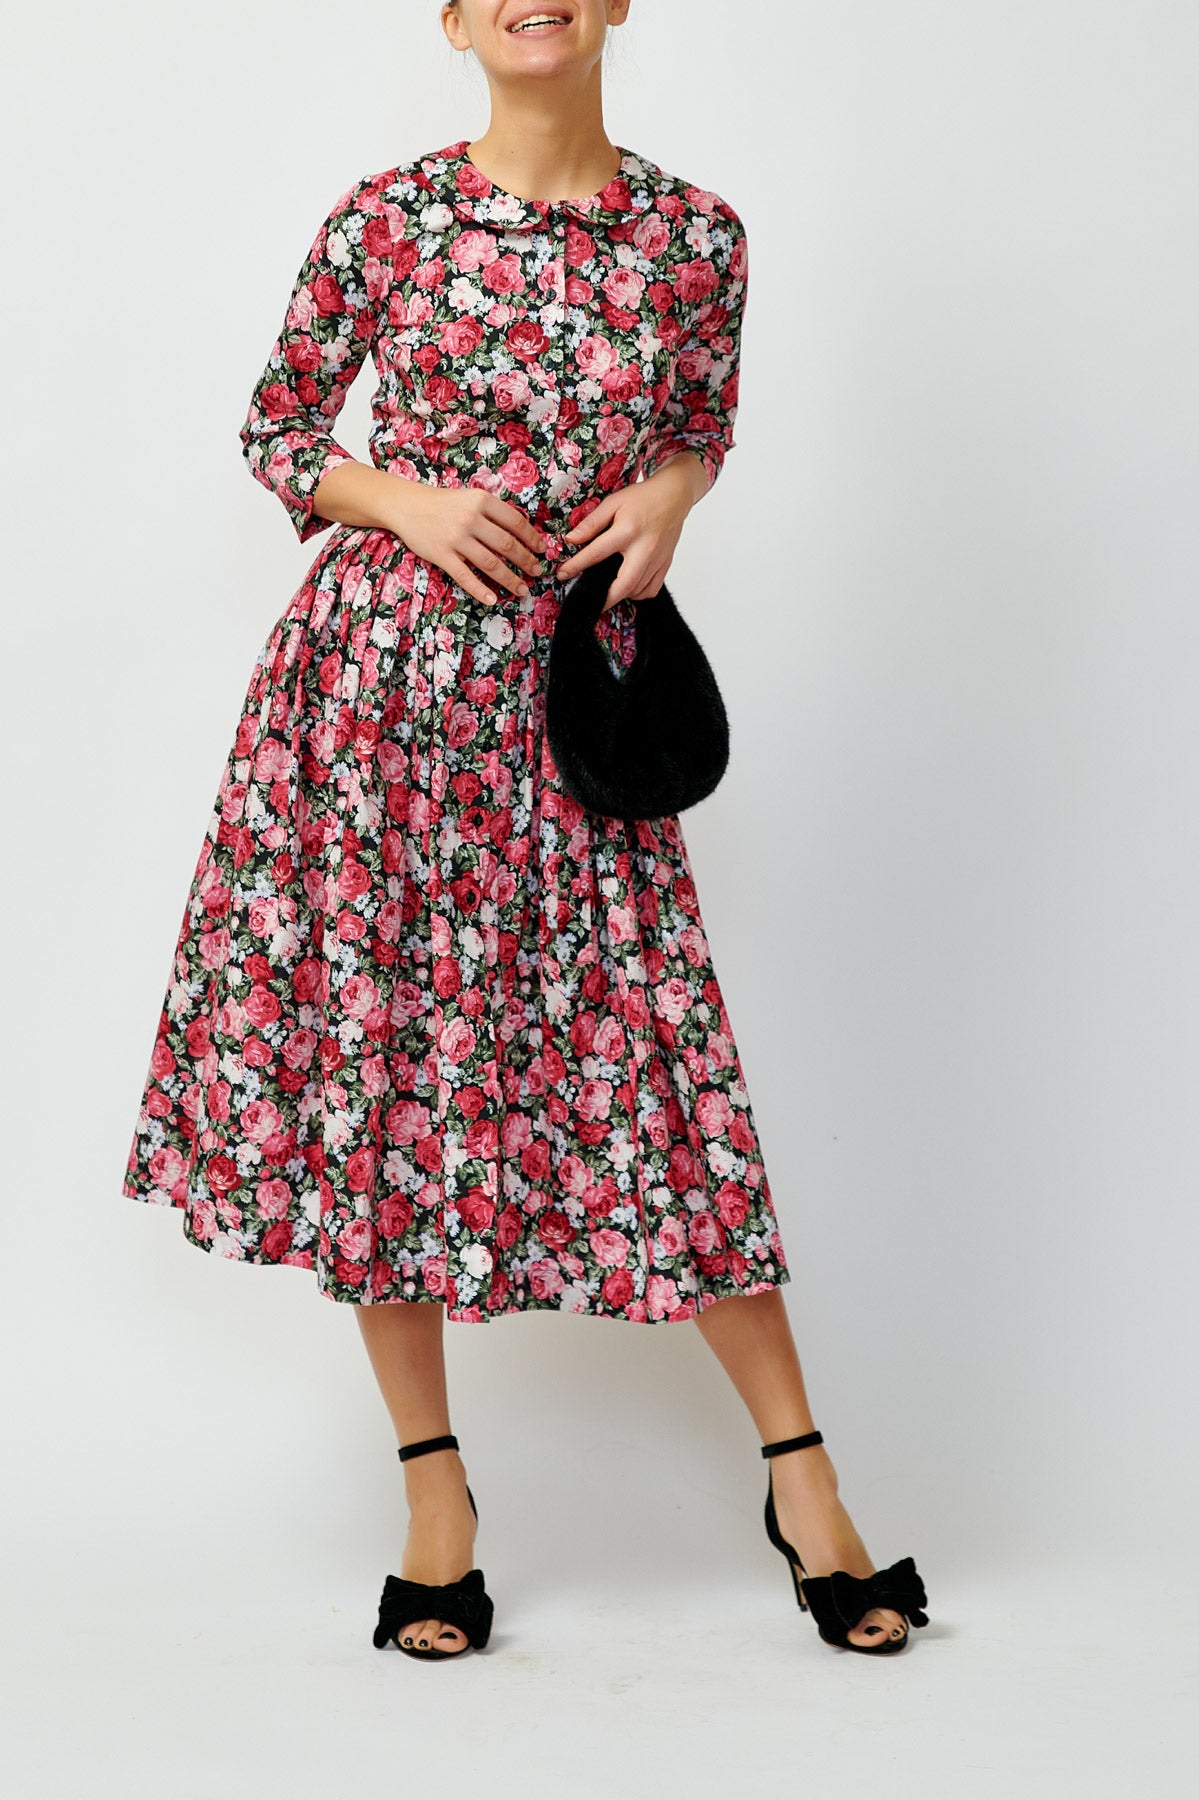 Shirt dress with roses on black